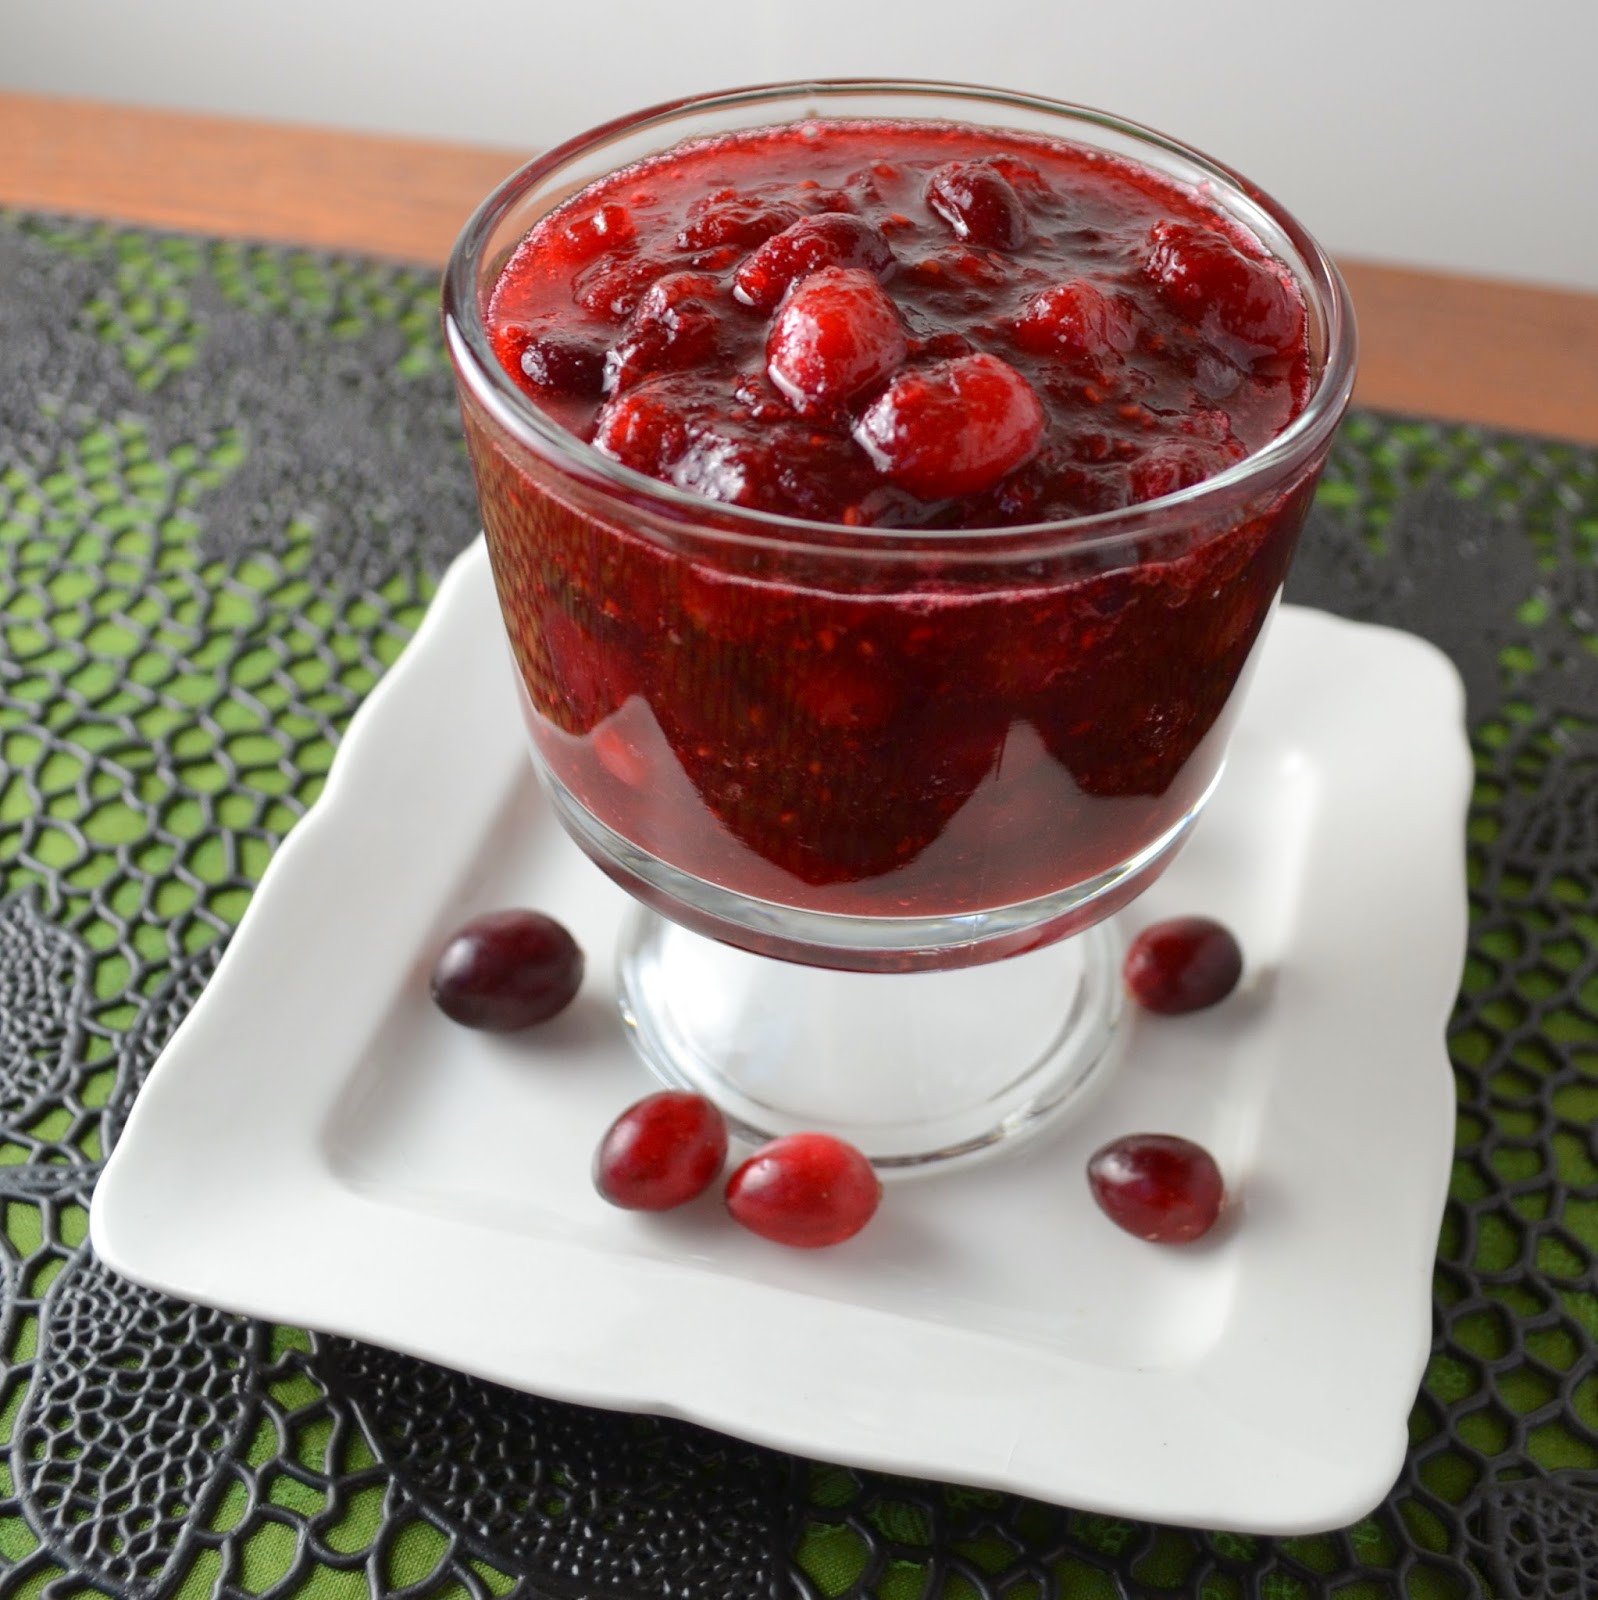 Raspberry Cranberry Sauce Recipe | by Hot Eats and Cool Reads